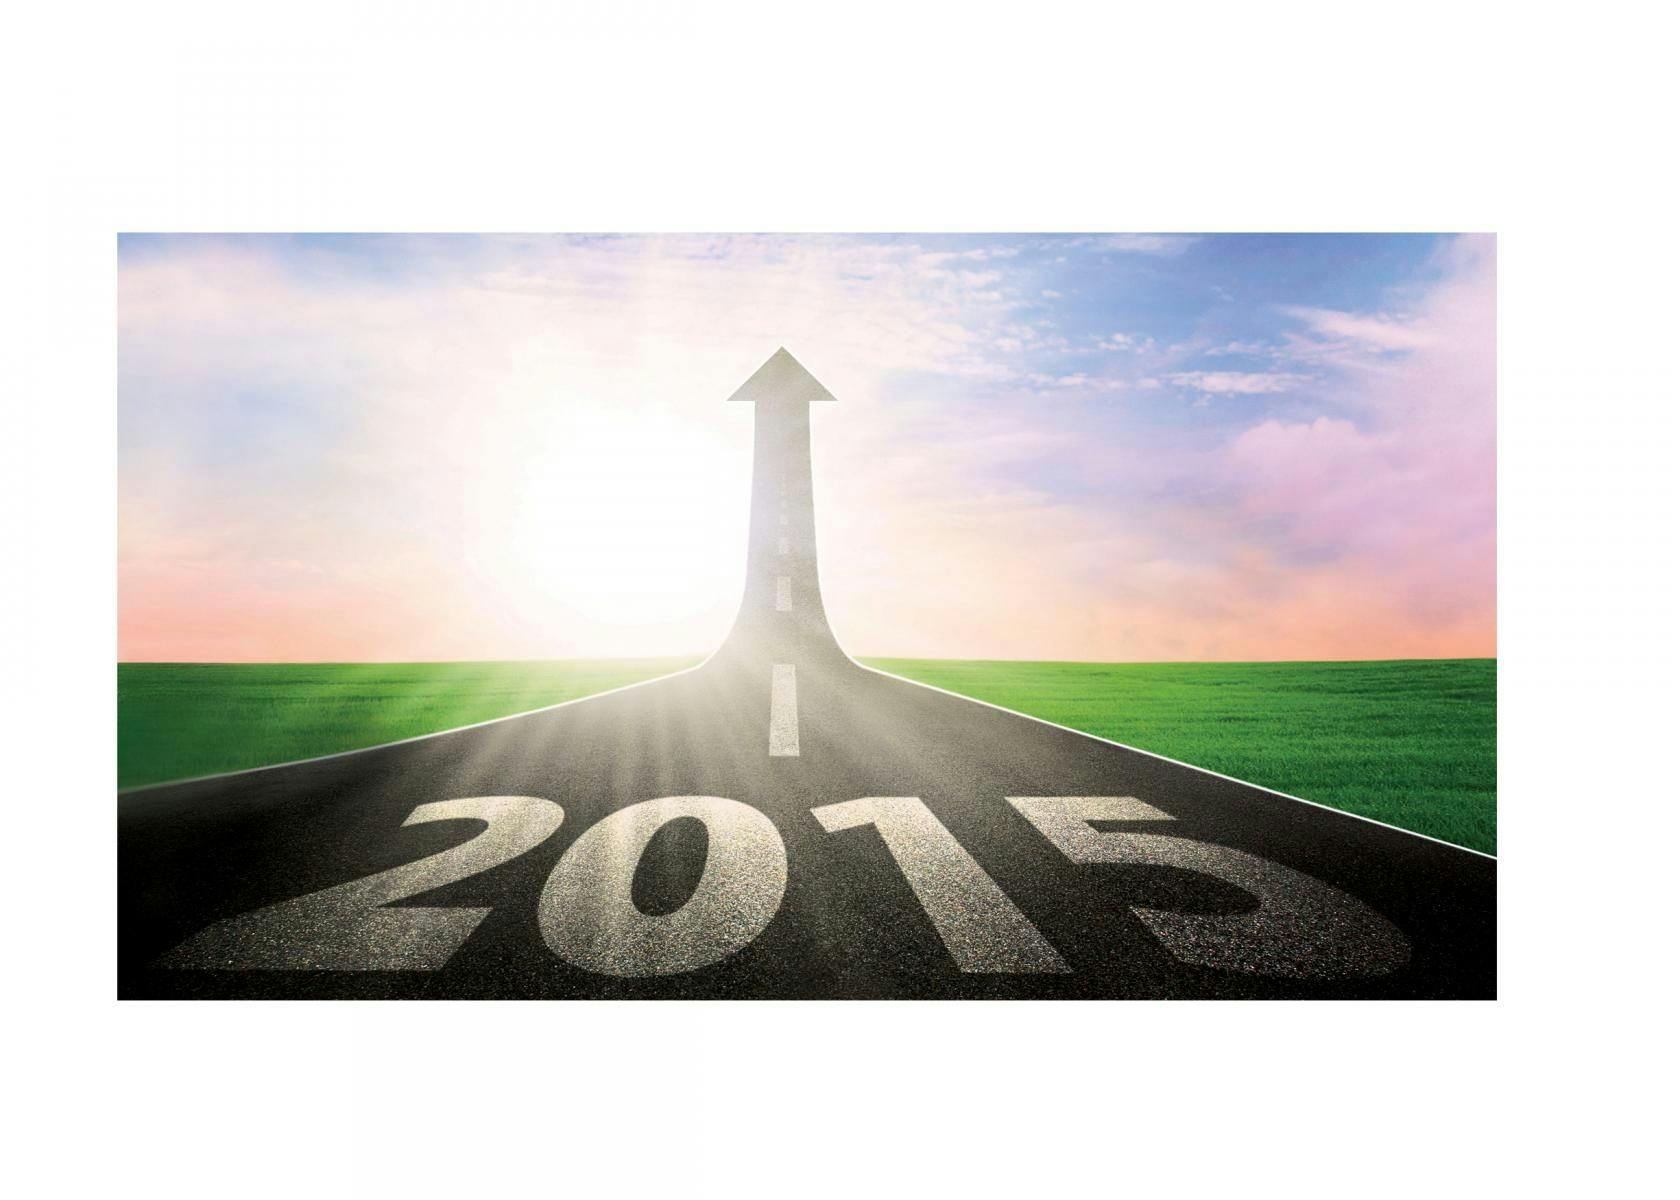 Dietary Supplement Industry Issues in 2015